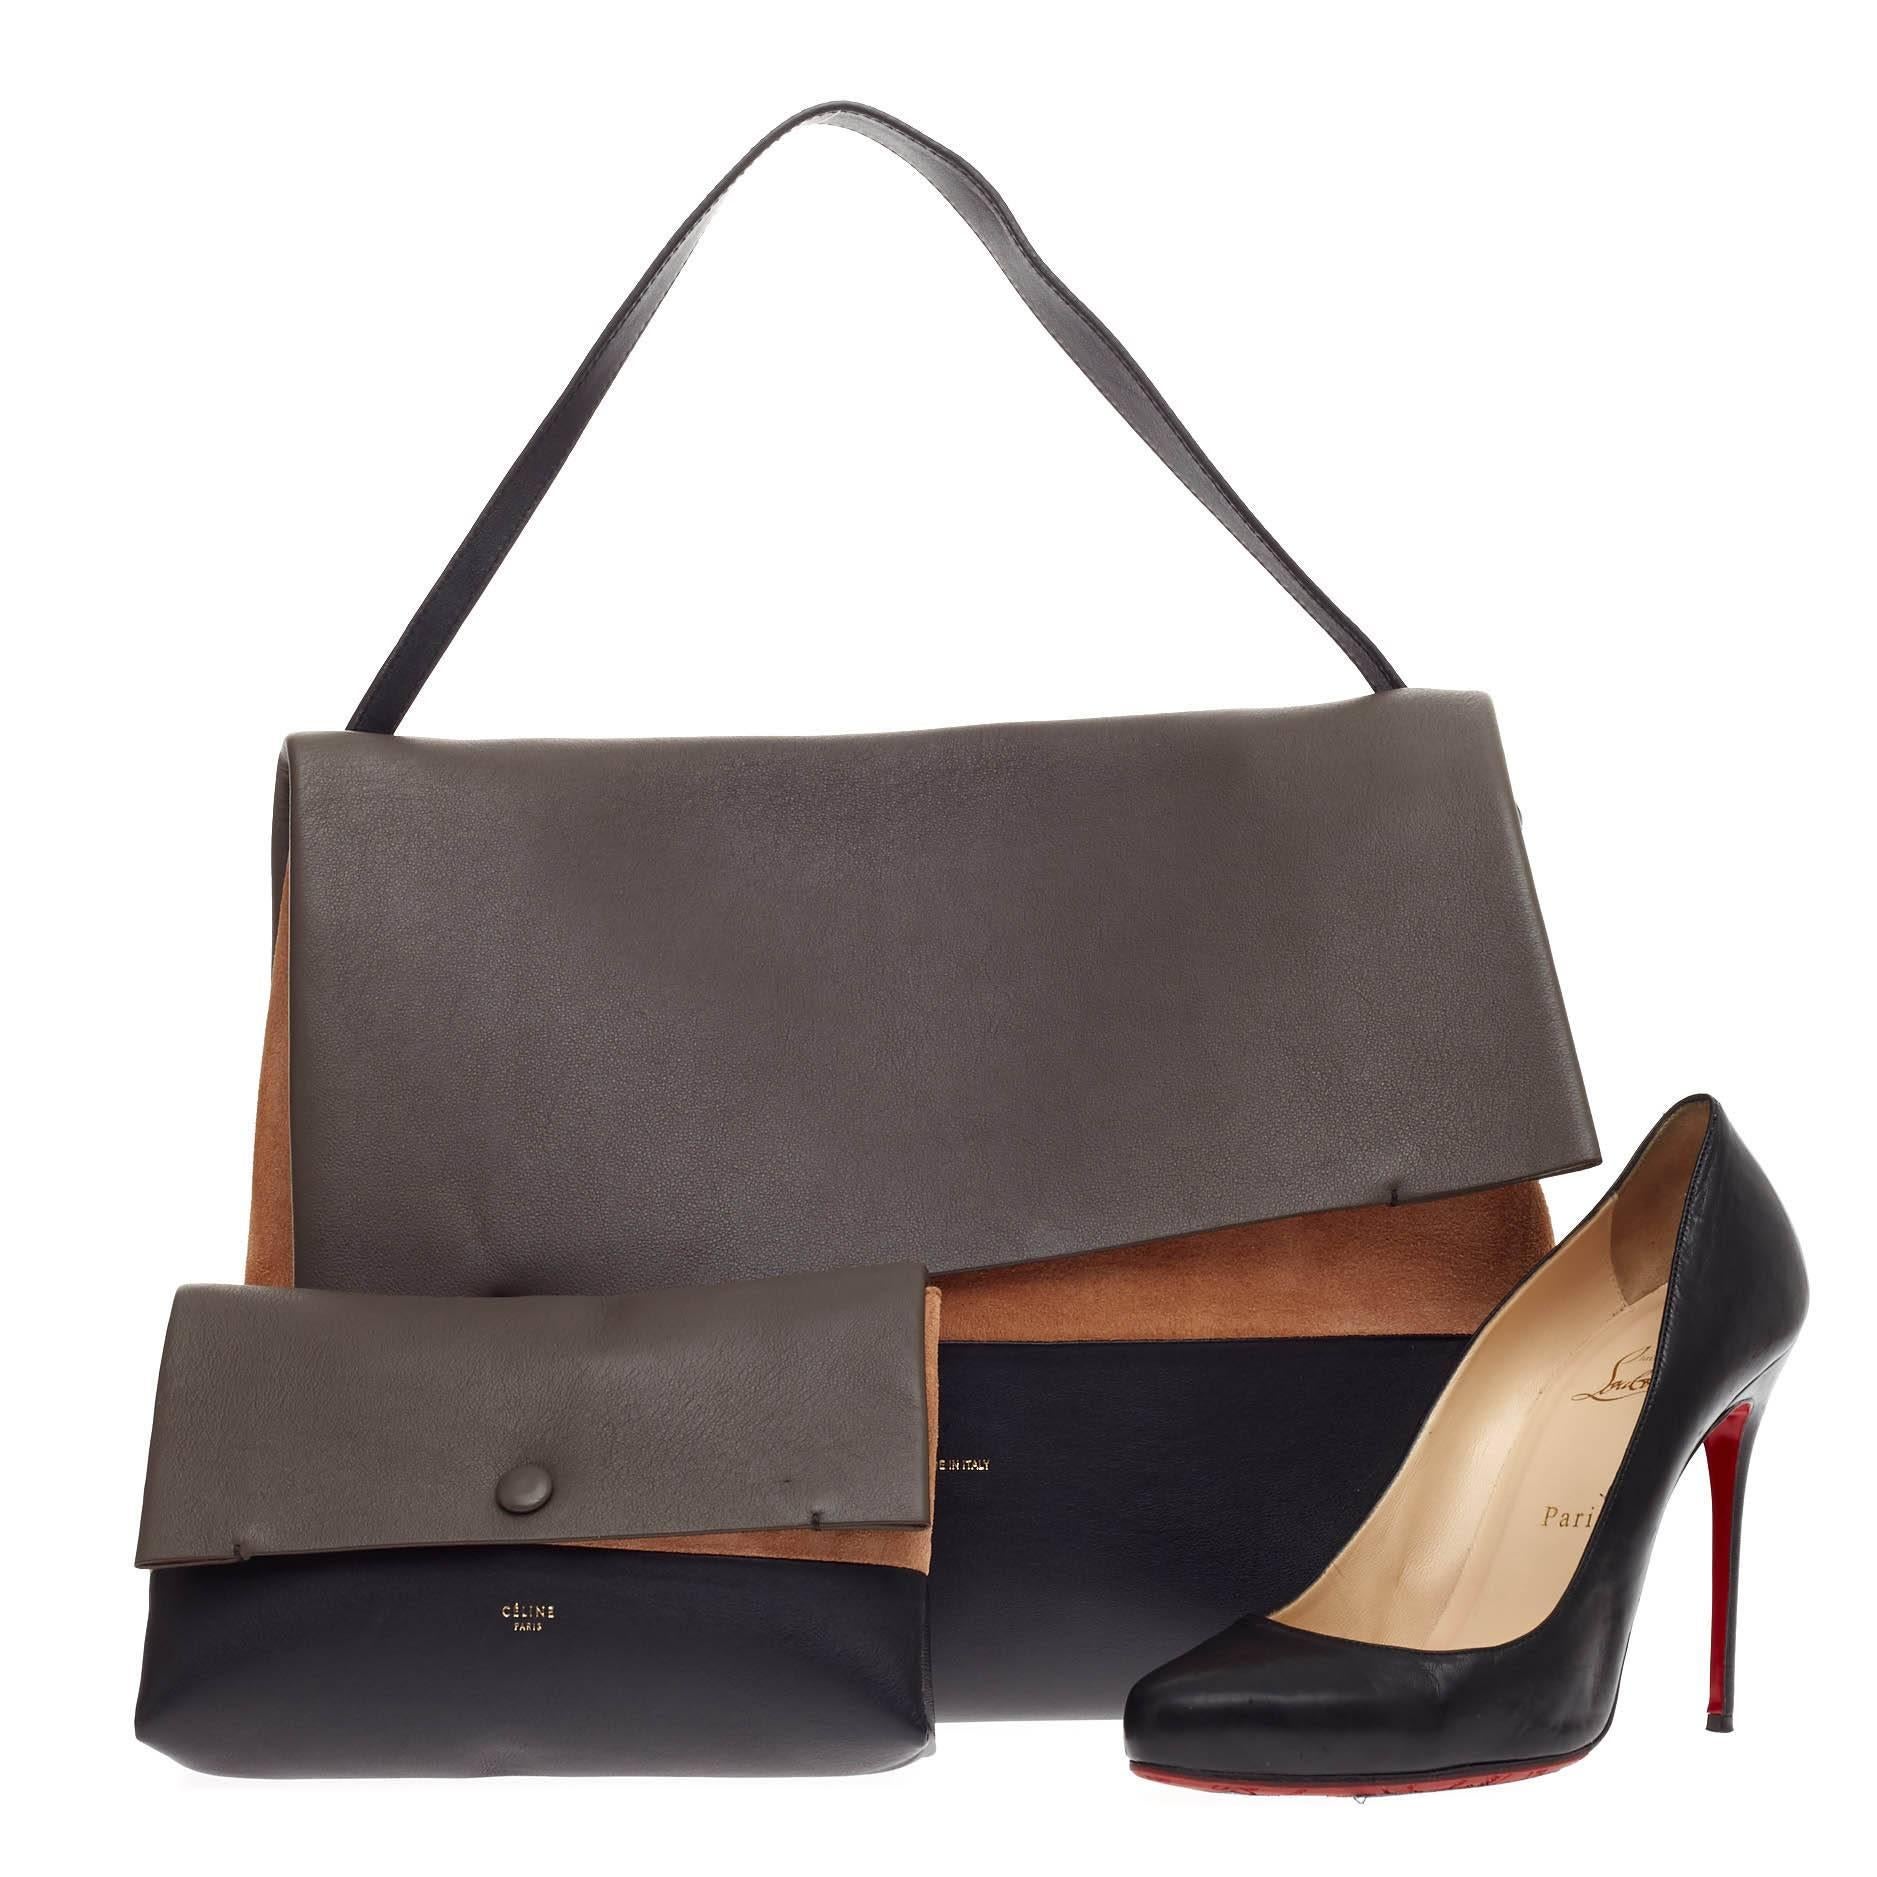 This authentic Celine All Soft Tote Leather is a neutral and understated look perfect for the modern woman. Crafted from triad neutral shades of gray leather, navy blue leather and tan suede, this minimalist tote features a single leather shoulder